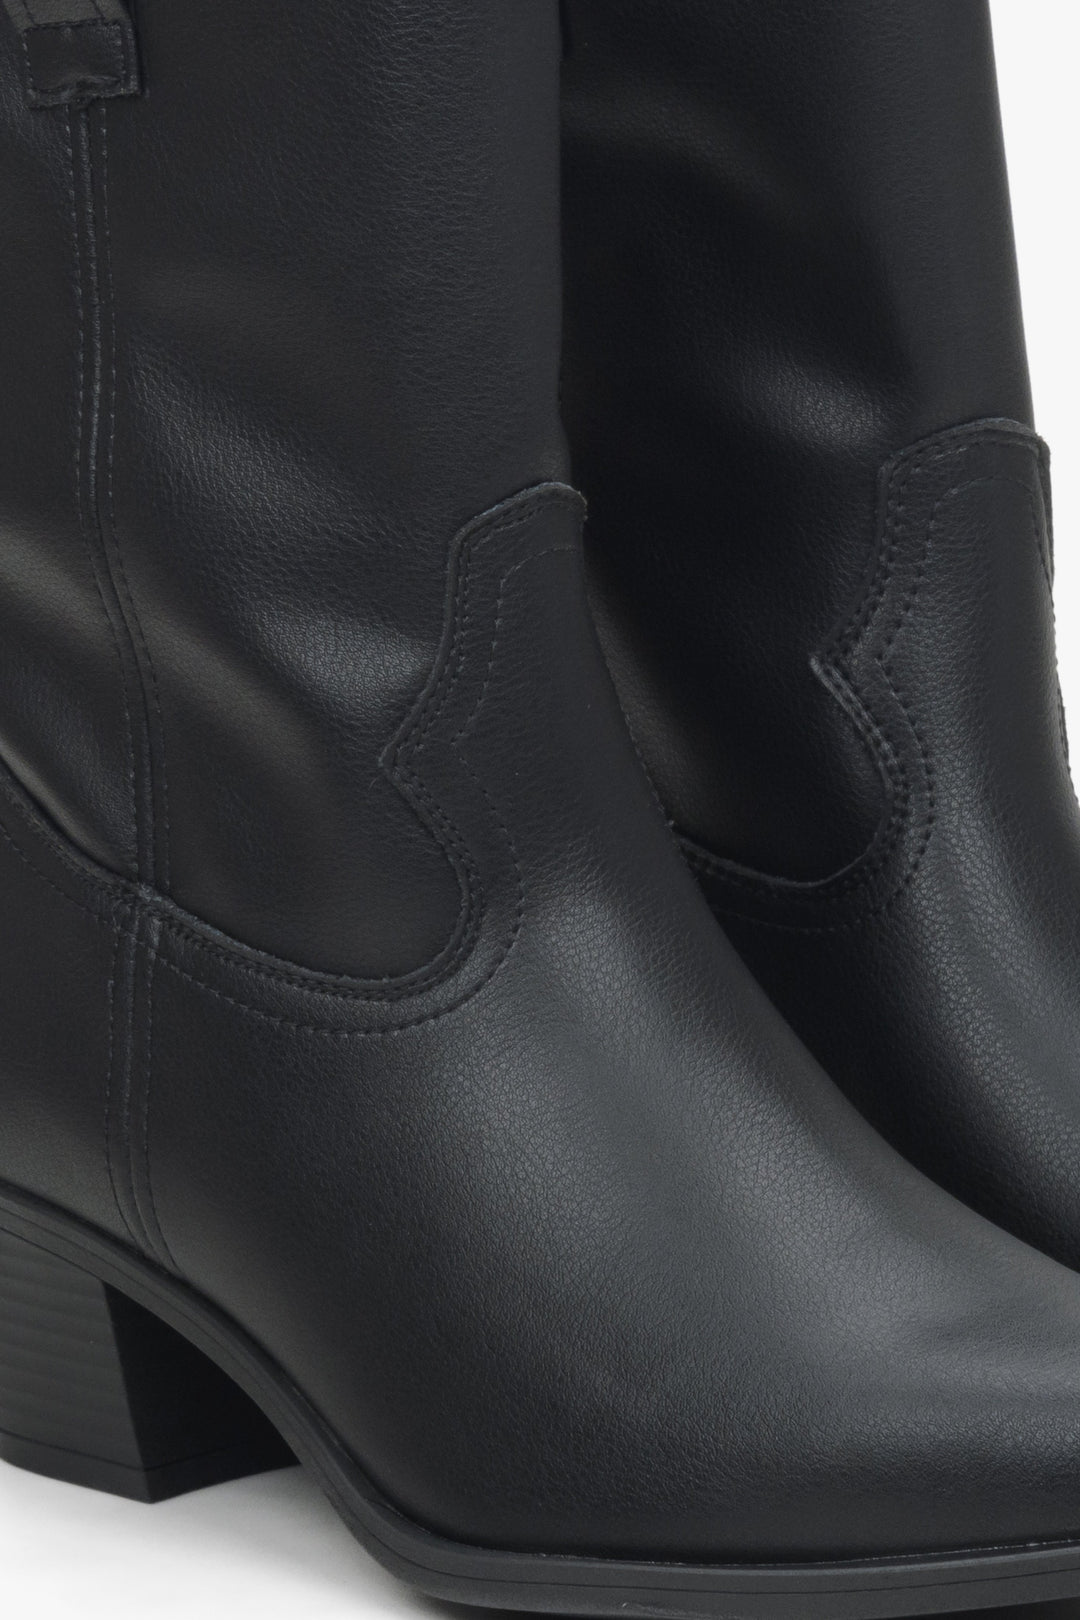 Women's black low-cut cowboy boots made of genuine leather by Estro - close-up on details.